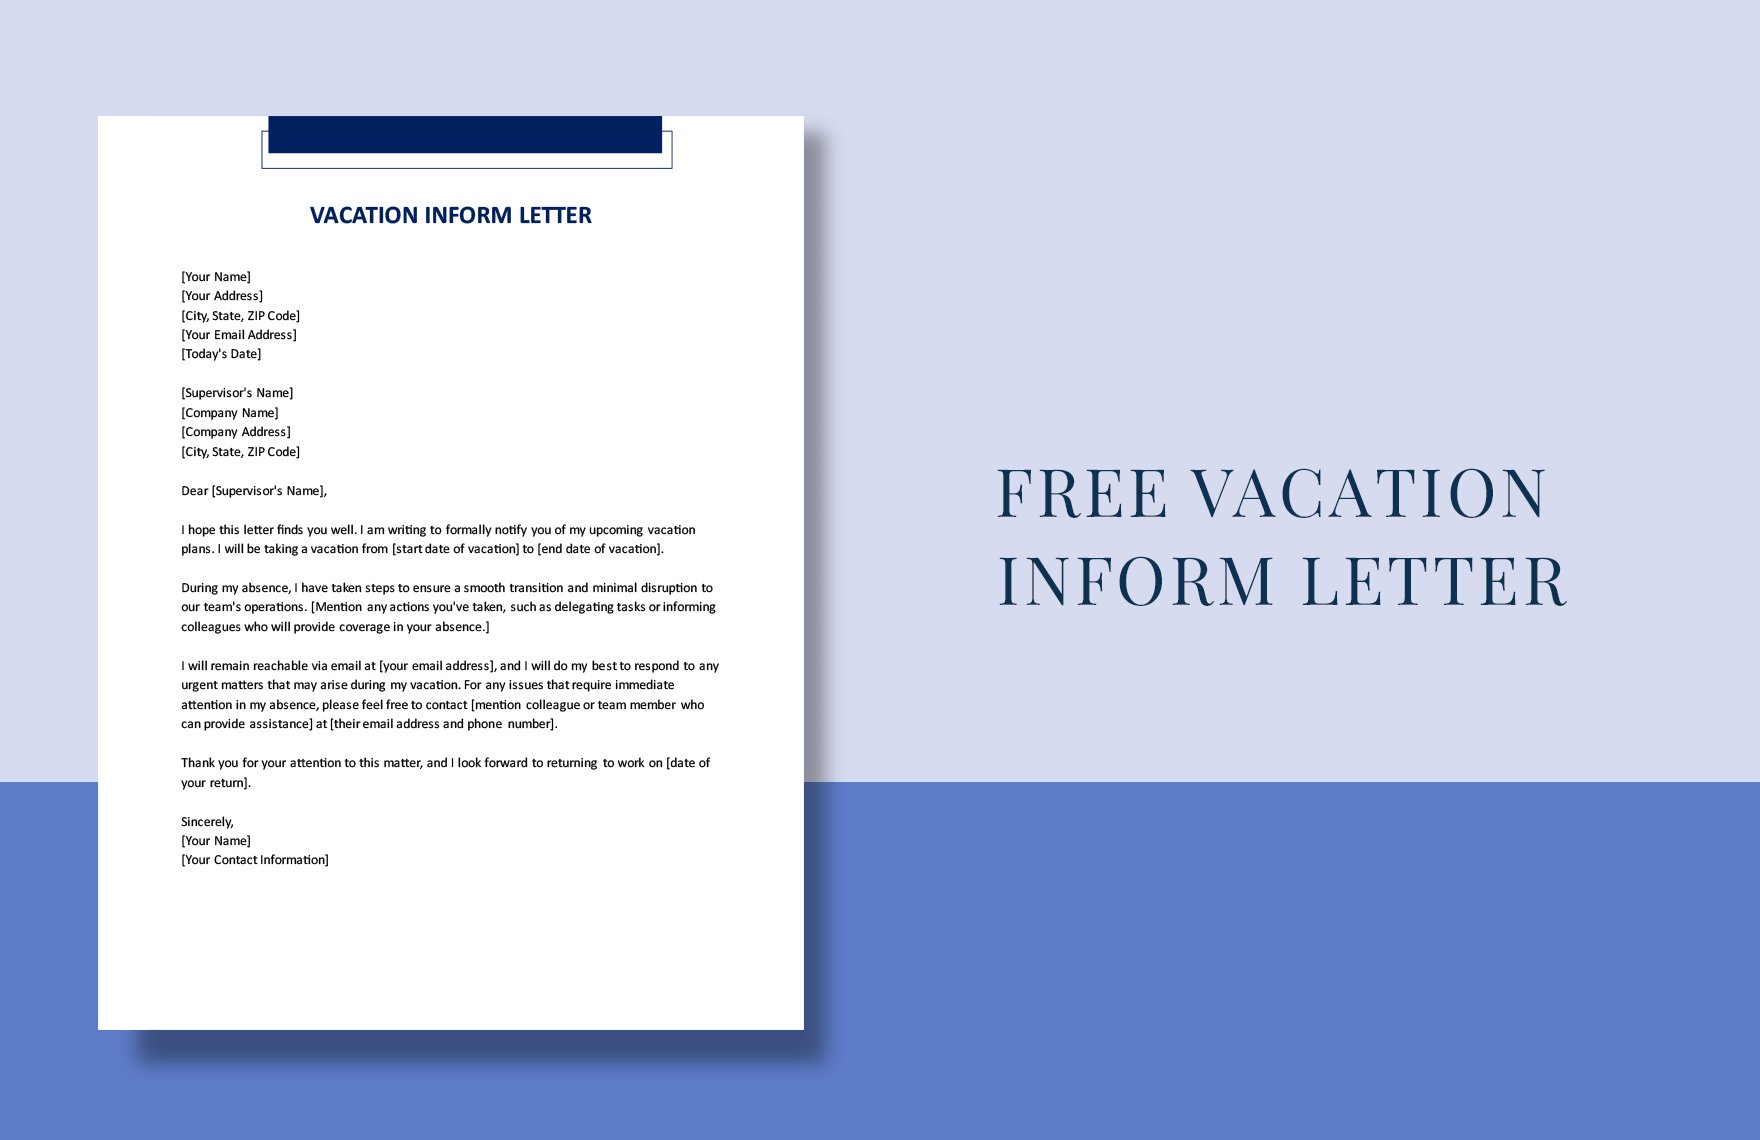 Vacation Inform Letter